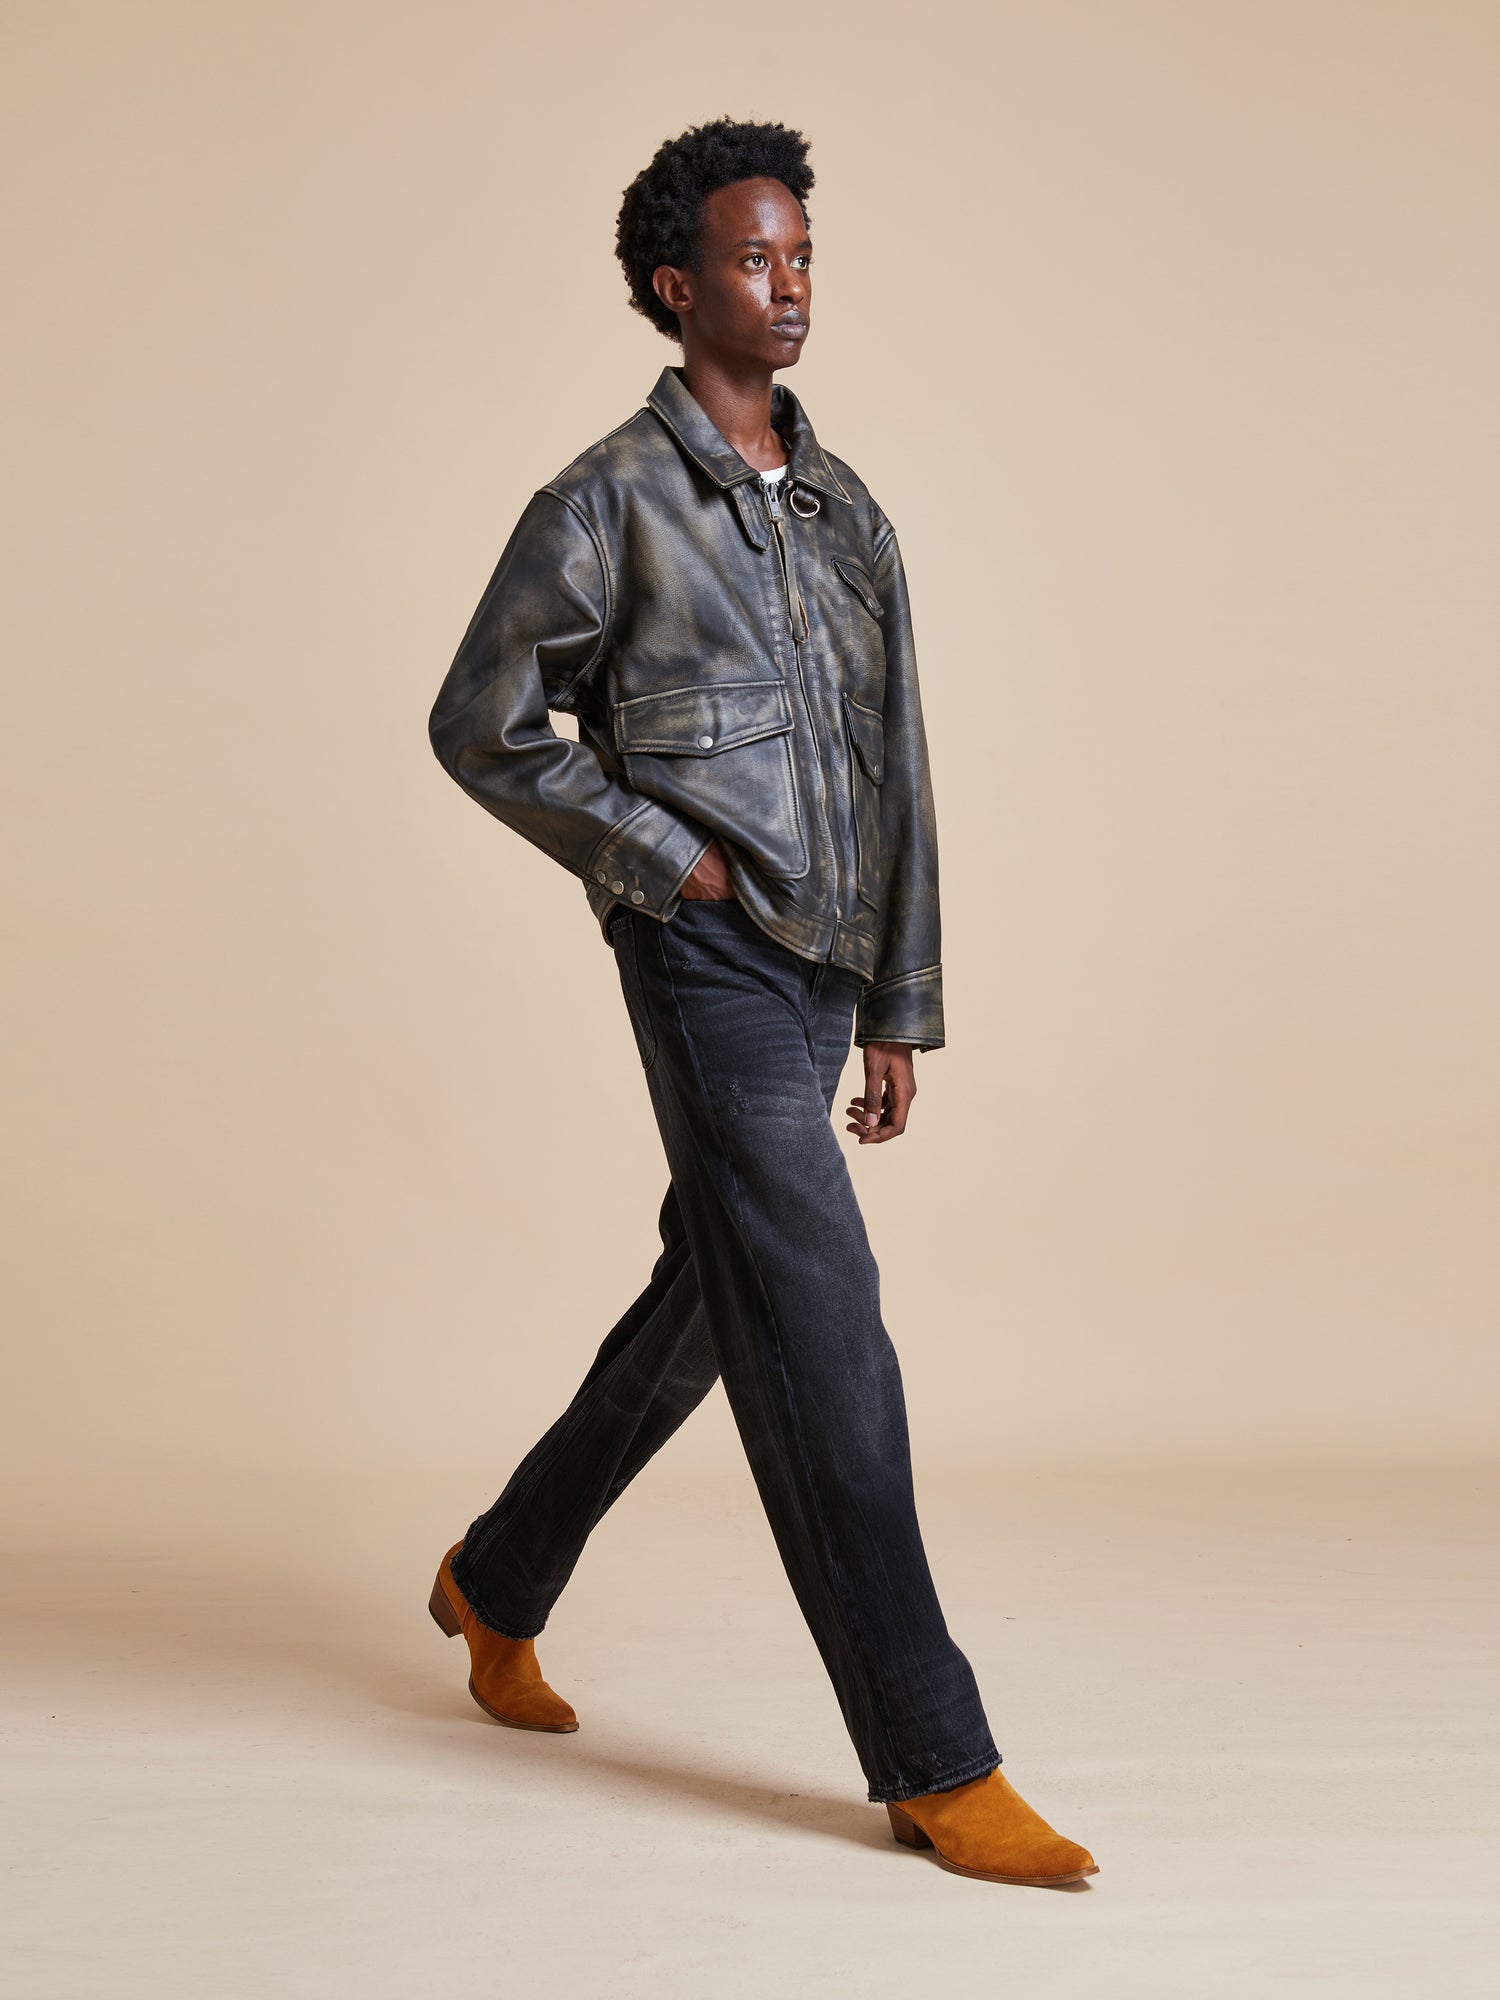 A man in a Found distressed leather pocket jacket and jeans walking on a beige background.